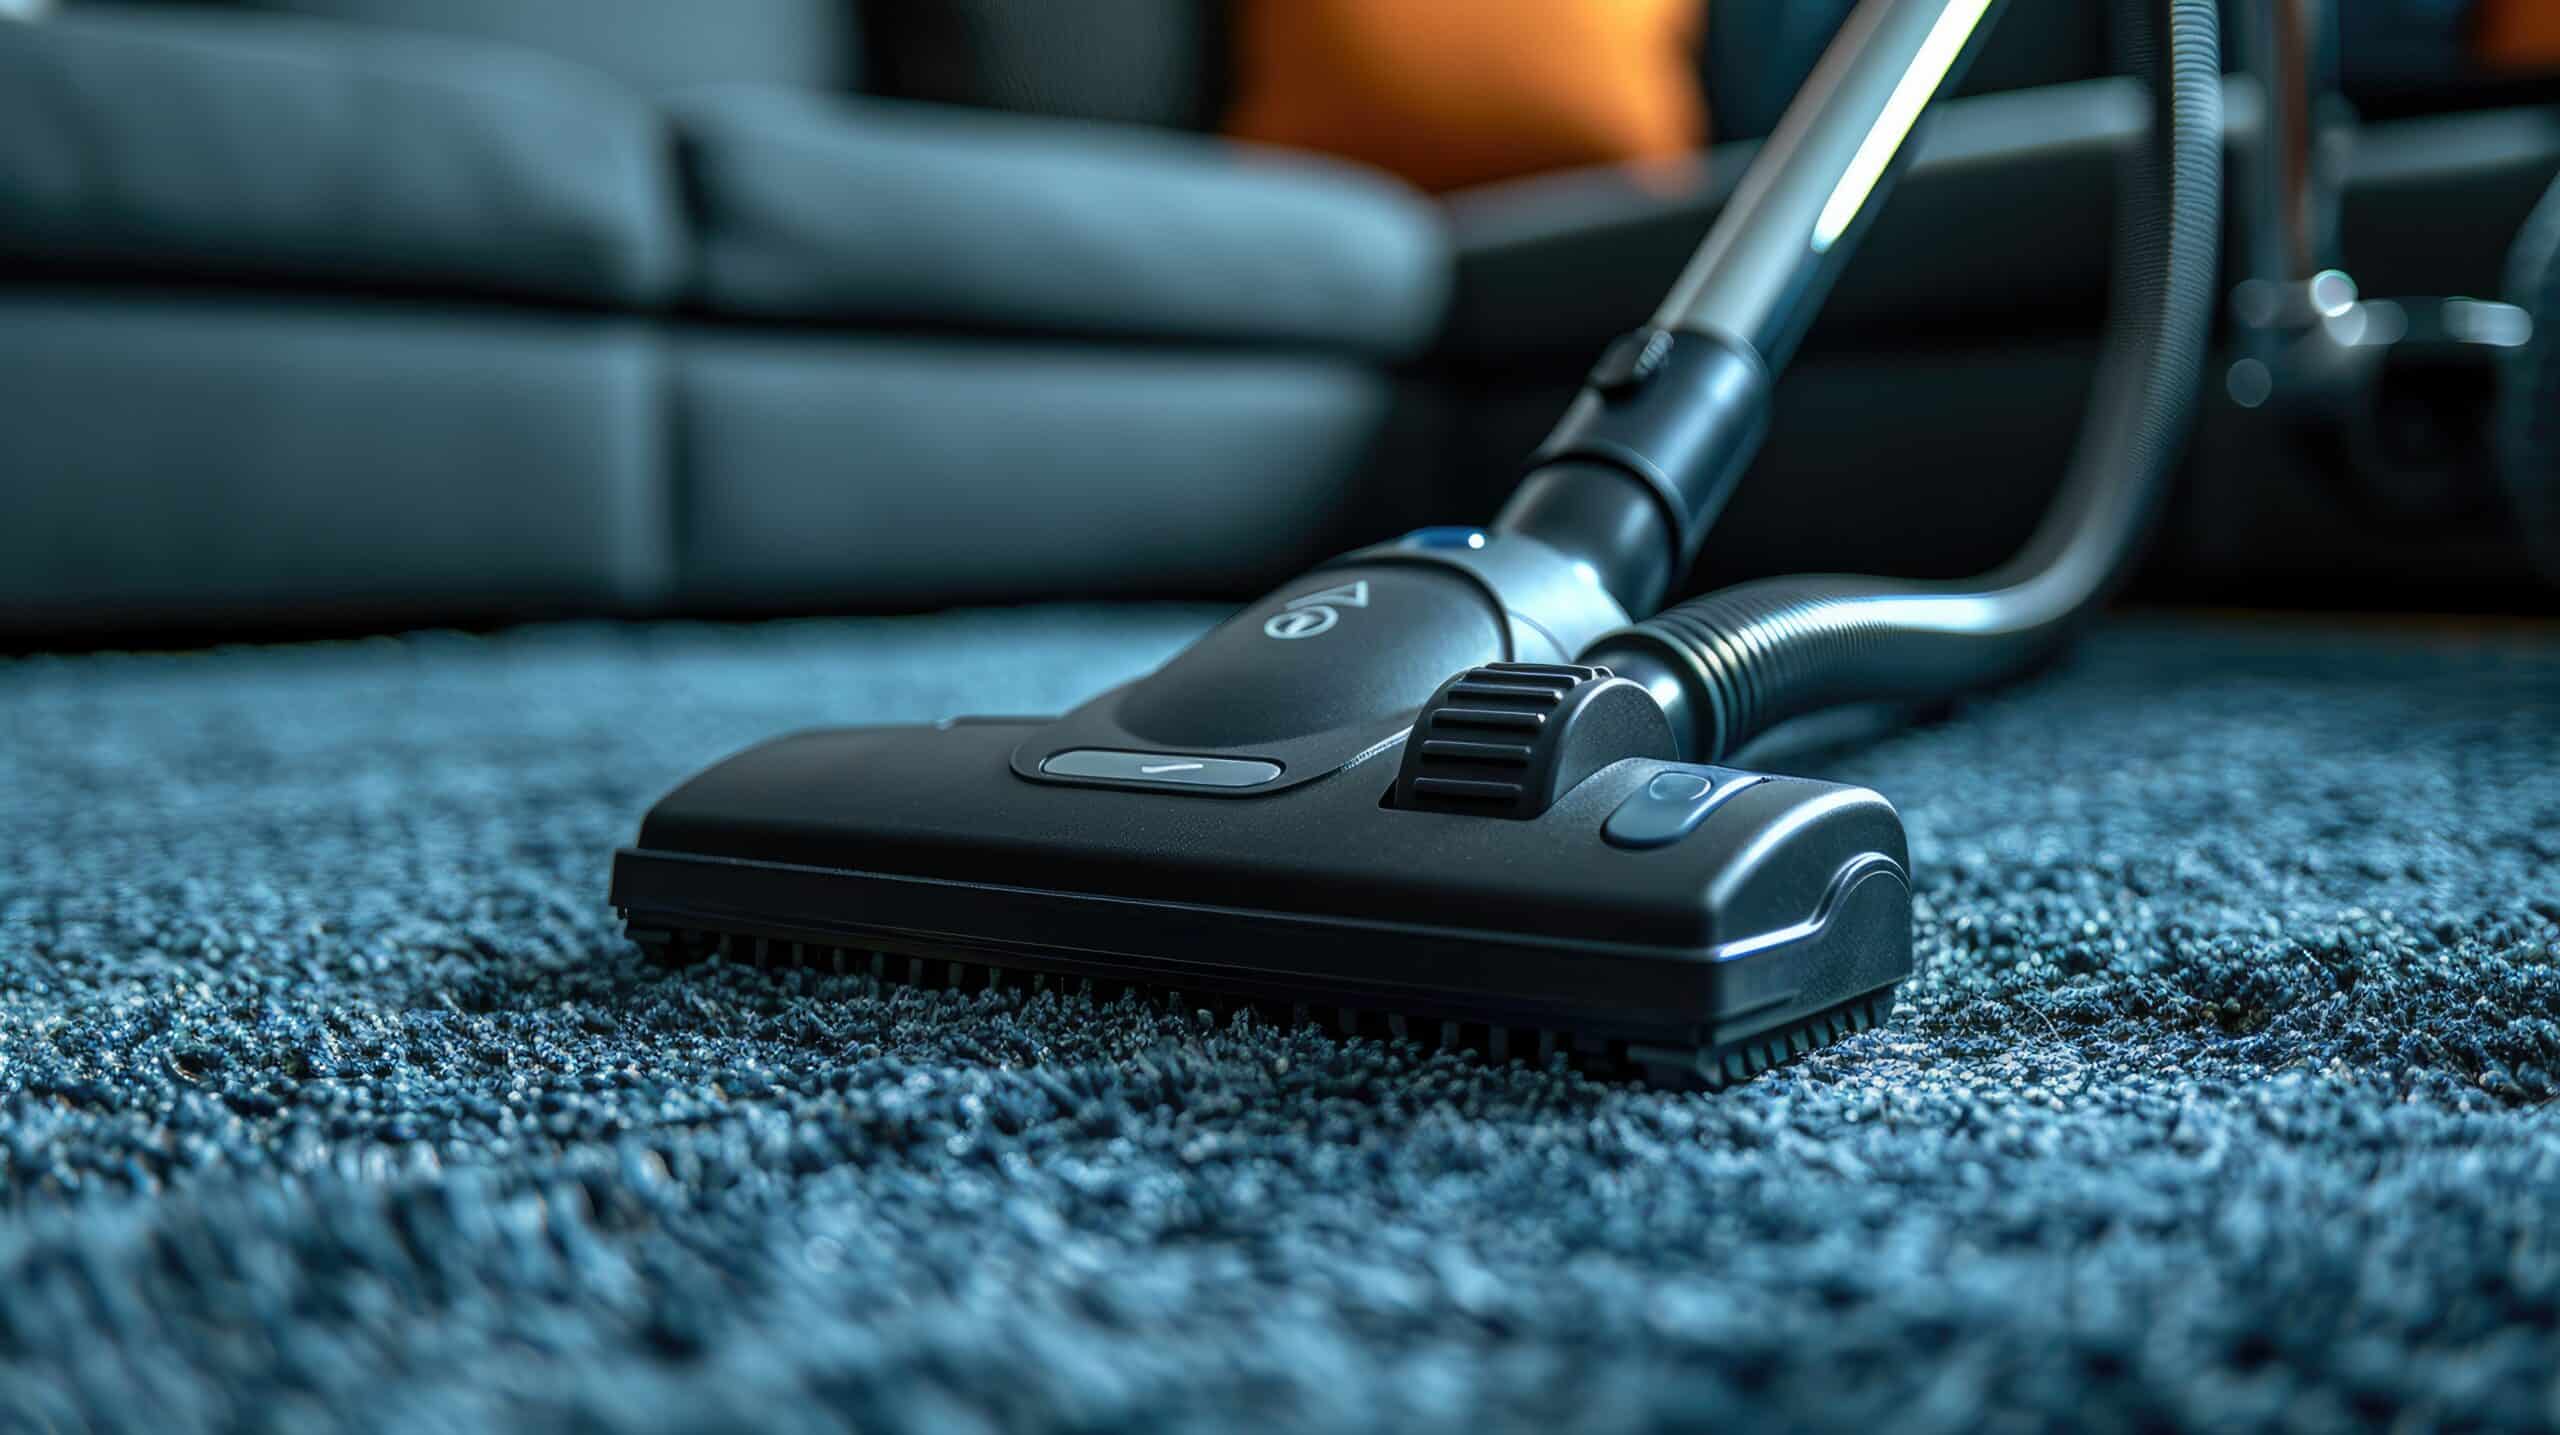 www.appr.com : How do steam cleaners work on upholstery and carpet?